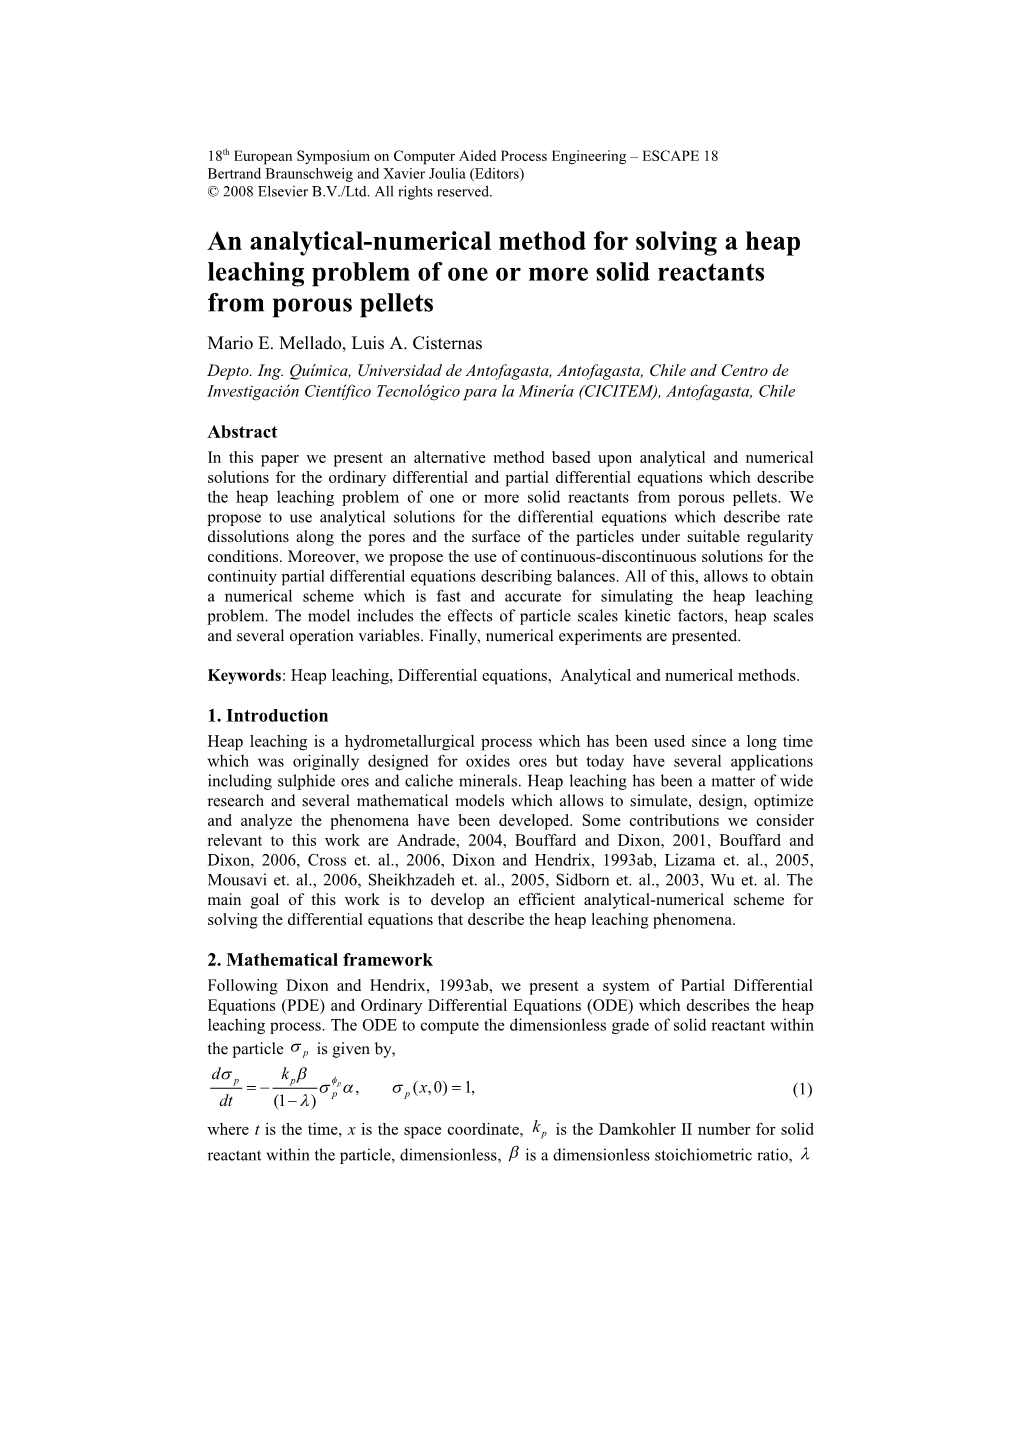 An Analytical-Numerical Method for Solving a Heap Leaching Problem 1